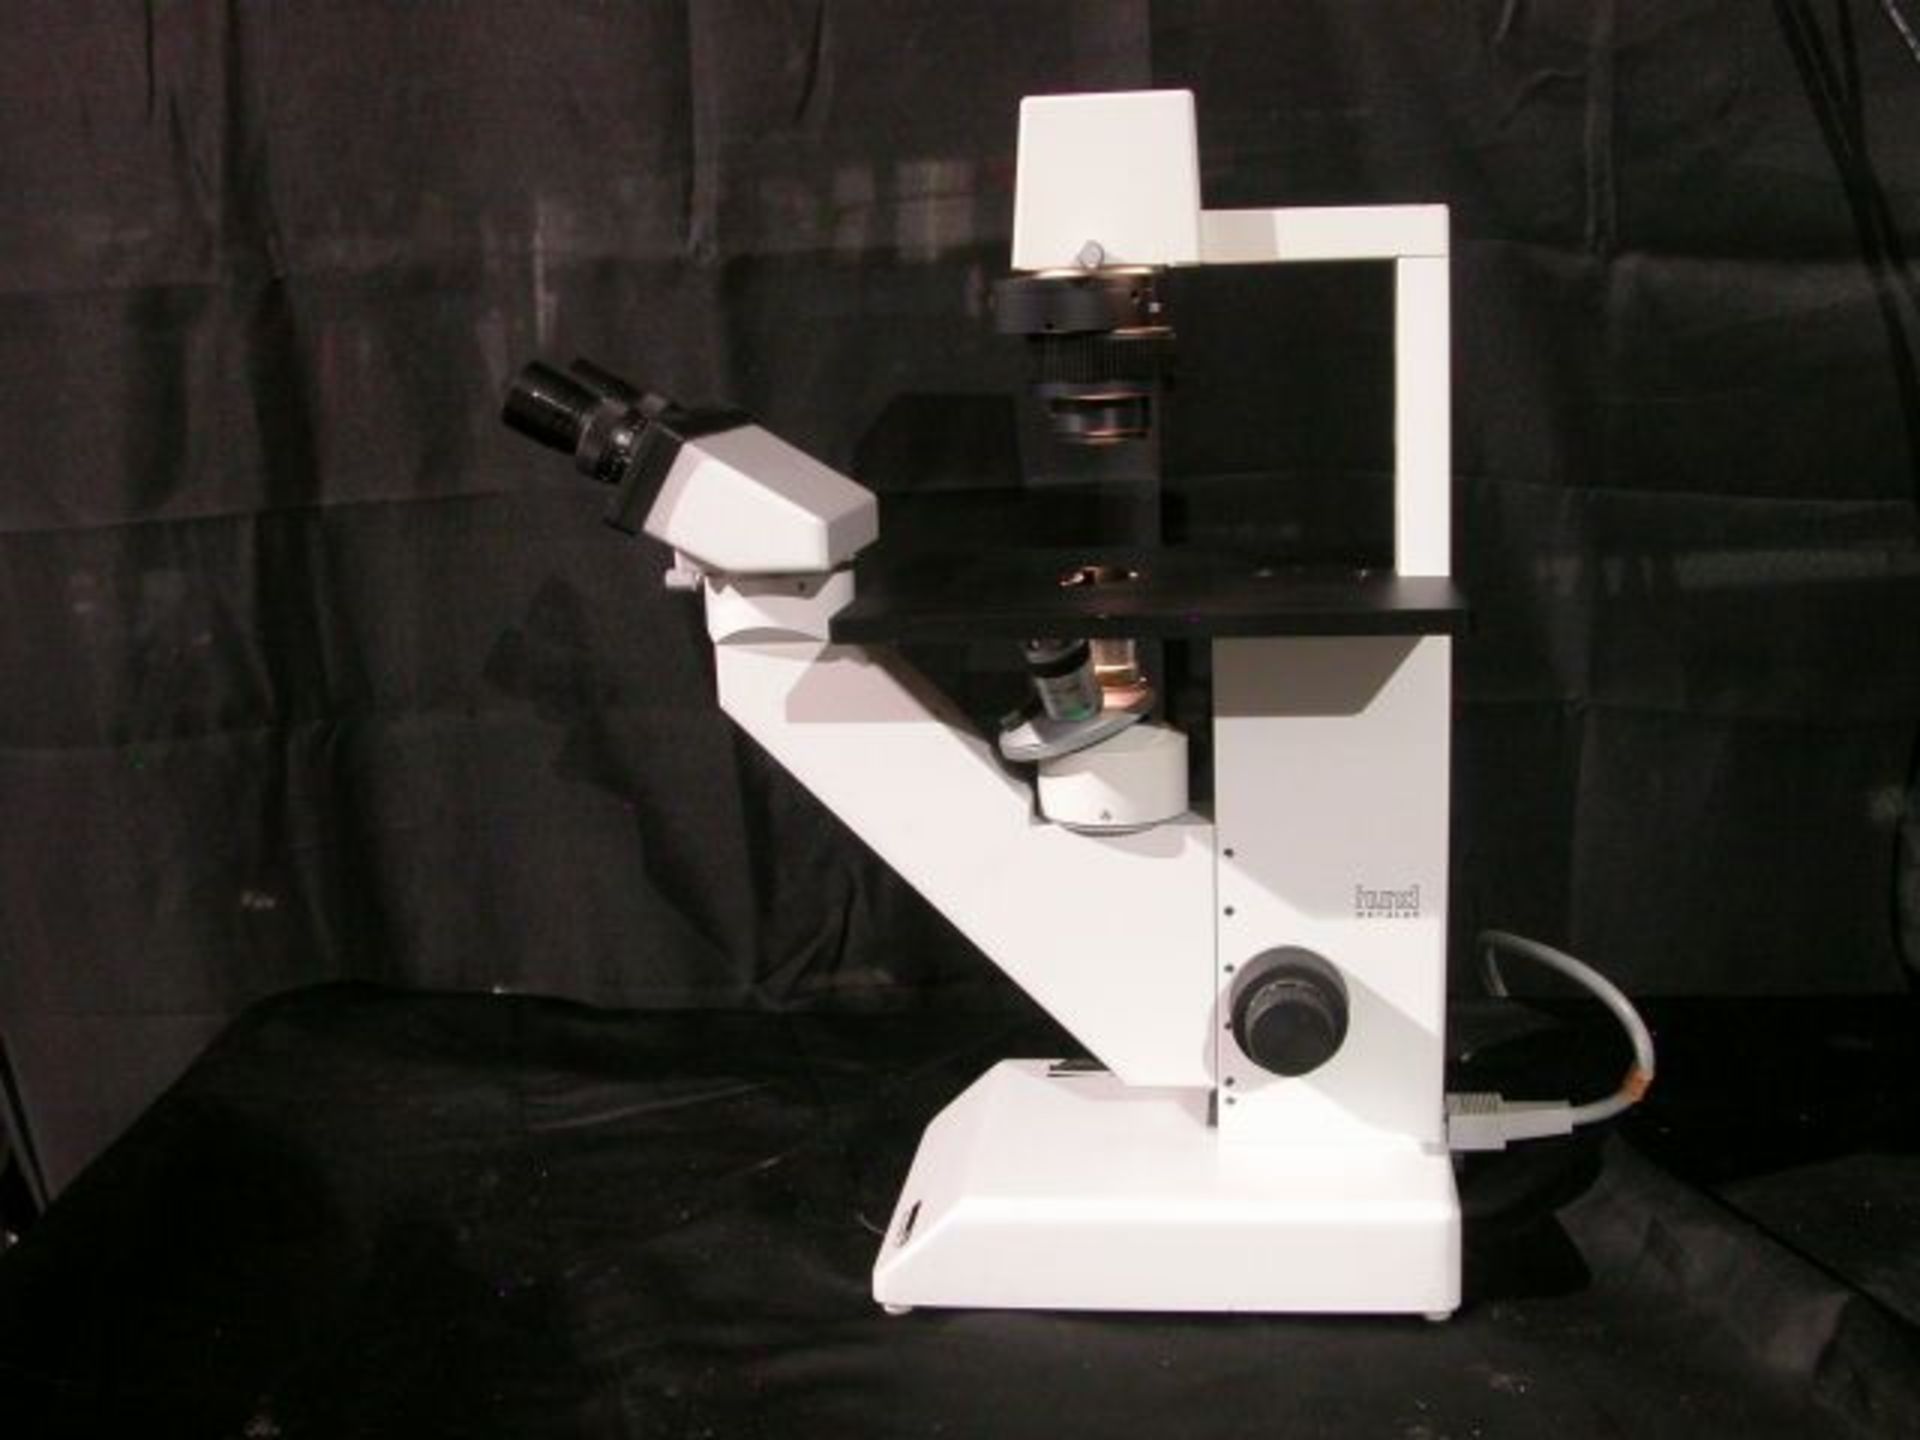 Hund Wetzlar Wilovert A Inverted Microscope 2 Ocular 3 Objectives, Qty 1, 330800442517 - Image 5 of 16